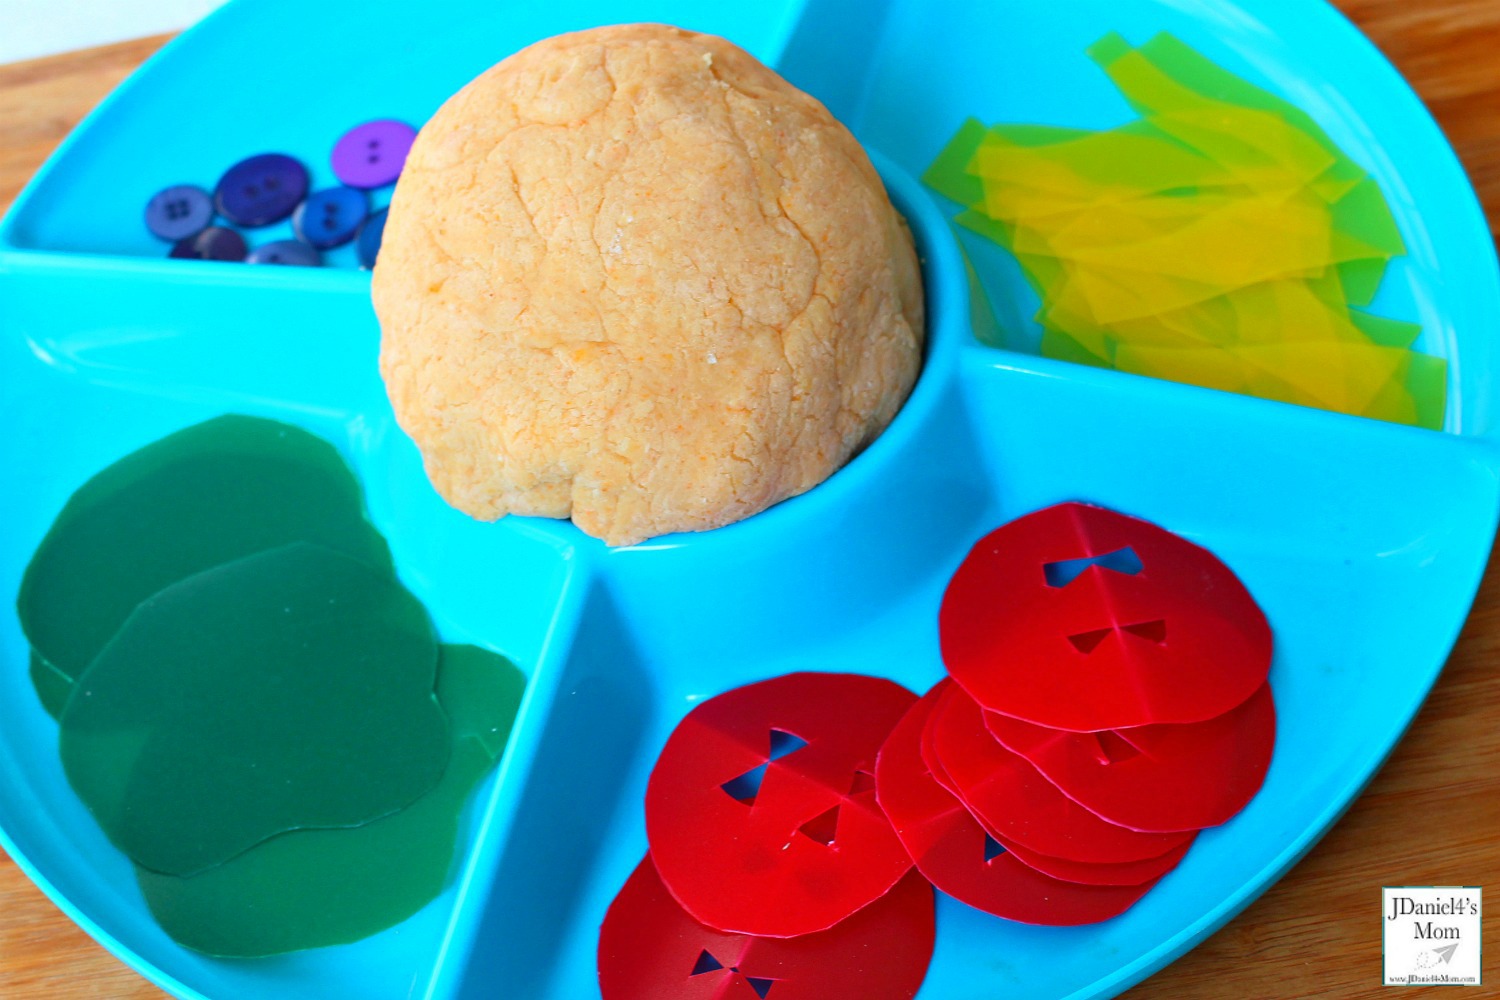 Dragons Love Tacos Themed Playdough Recipe and Activity - Children at home and students at school will have fun building dinosaurs sized tacos with taco scented playdough. This playdough recipe is so easy to make. This what the activity supplies look like.